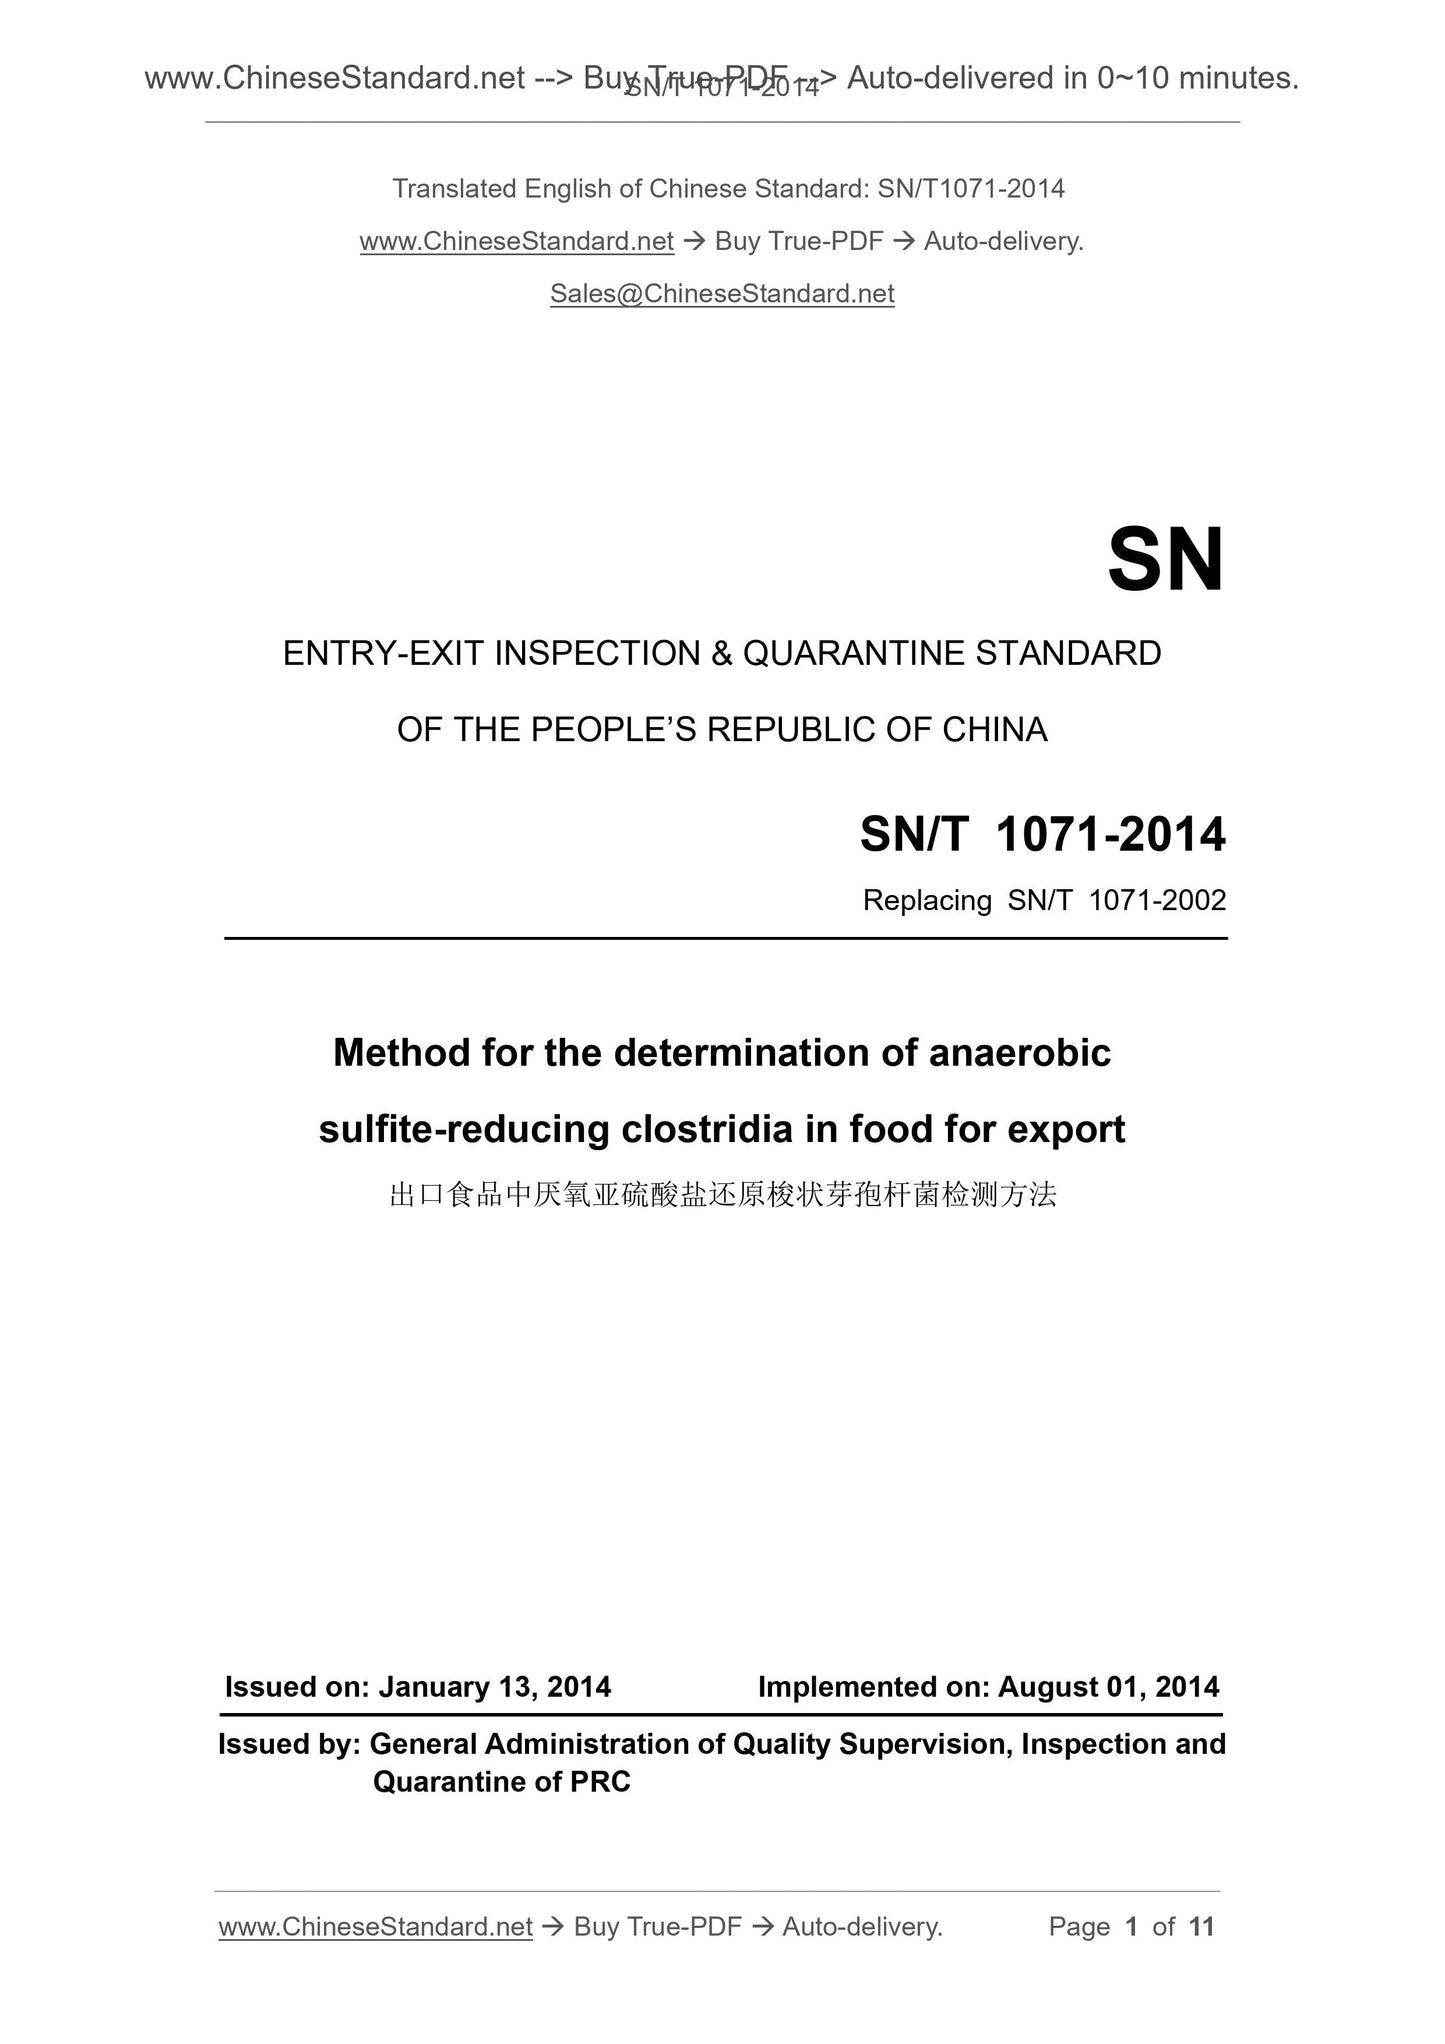 SN/T 1071-2014 Page 1